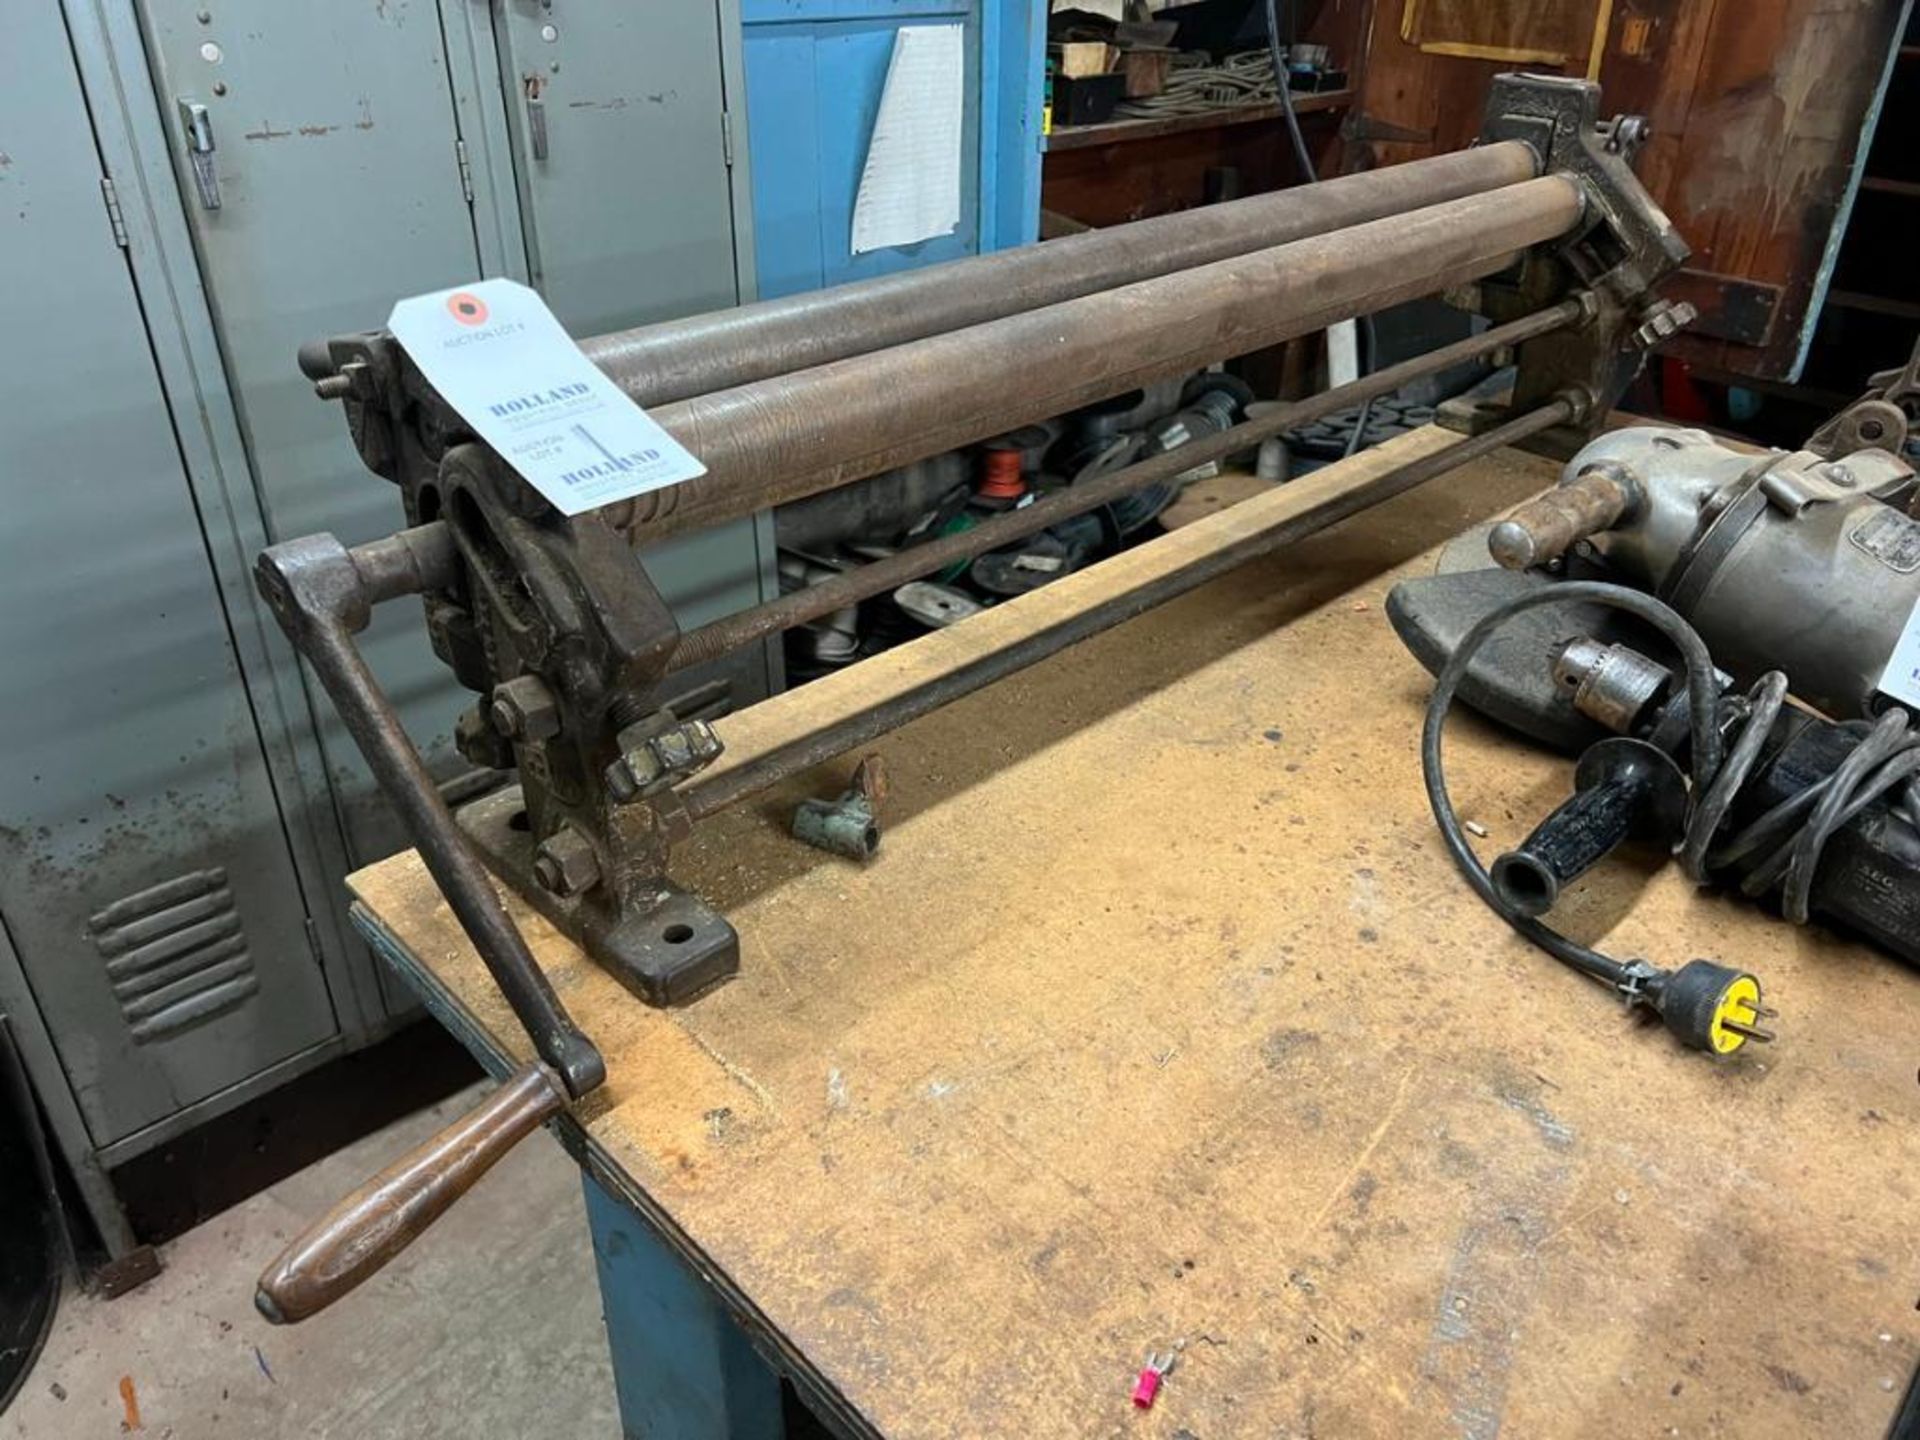 Pexto Mdl: 382A 36" Sheet Metal Roller - Serial #: 7-1922, Located At 32 Mill St, Newport, ME 04953